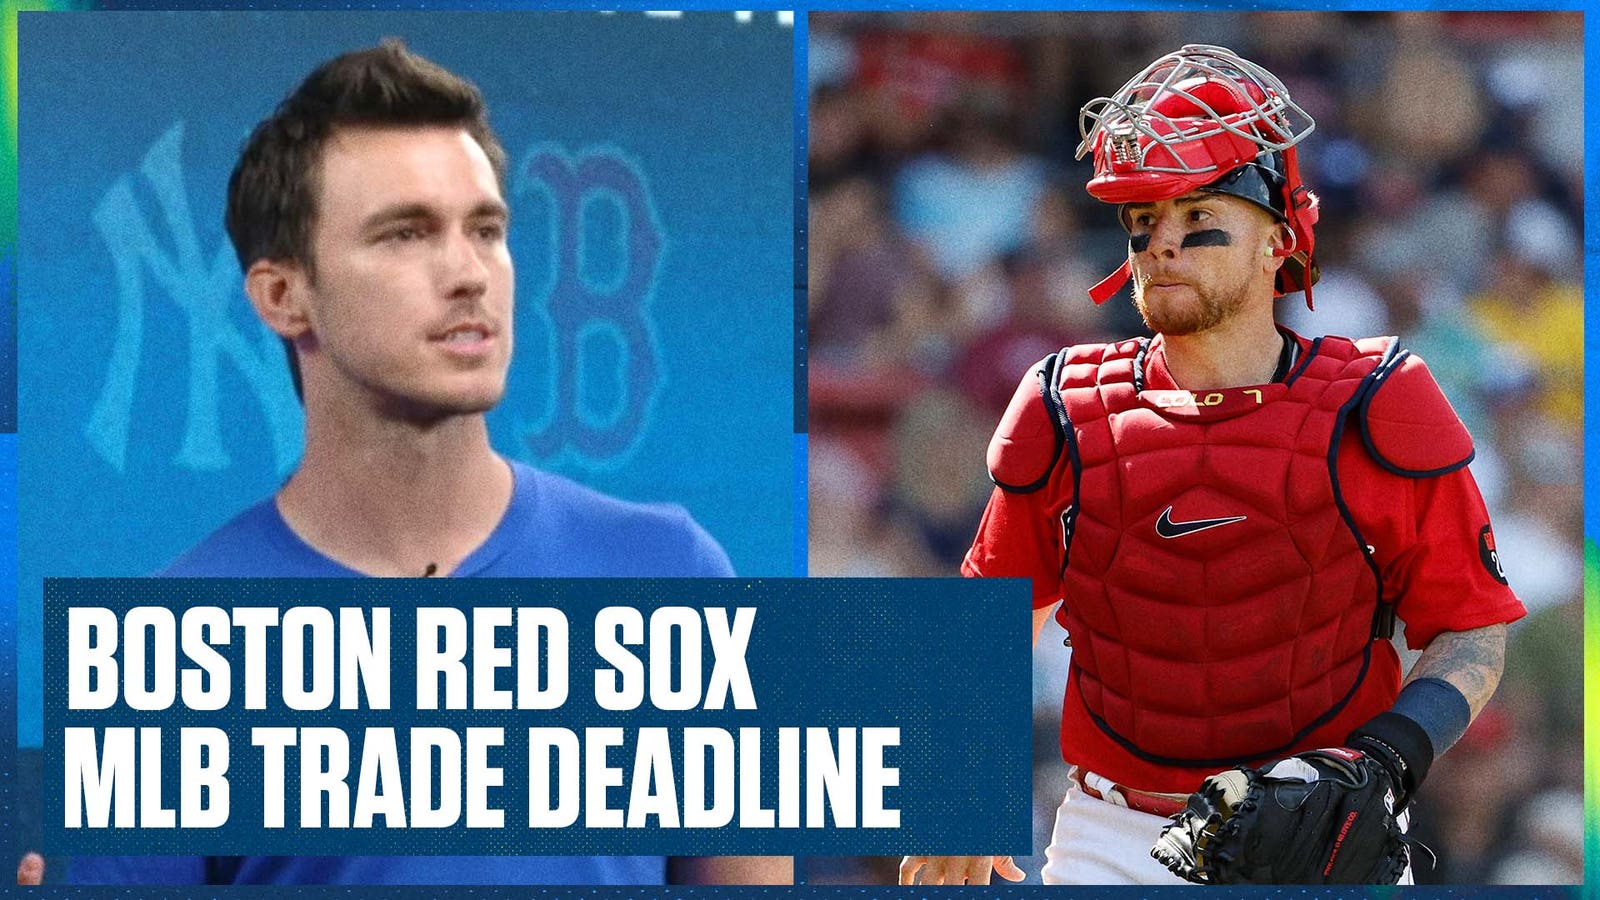 MLB Trade Deadline: Red Sox come up short